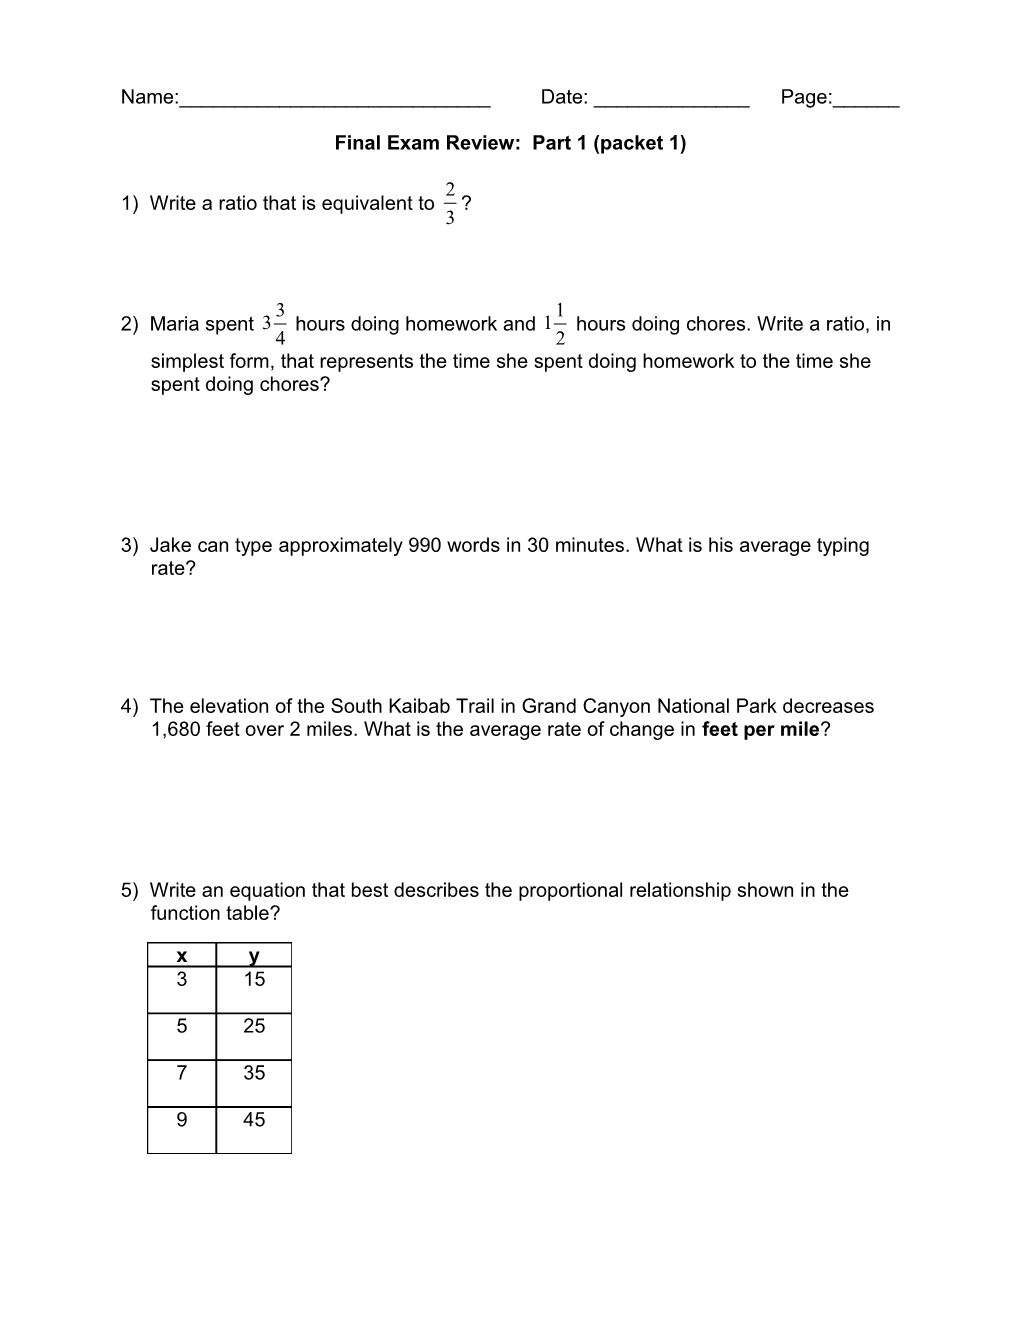 Final Exam Review: Part 1 (Packet 1)